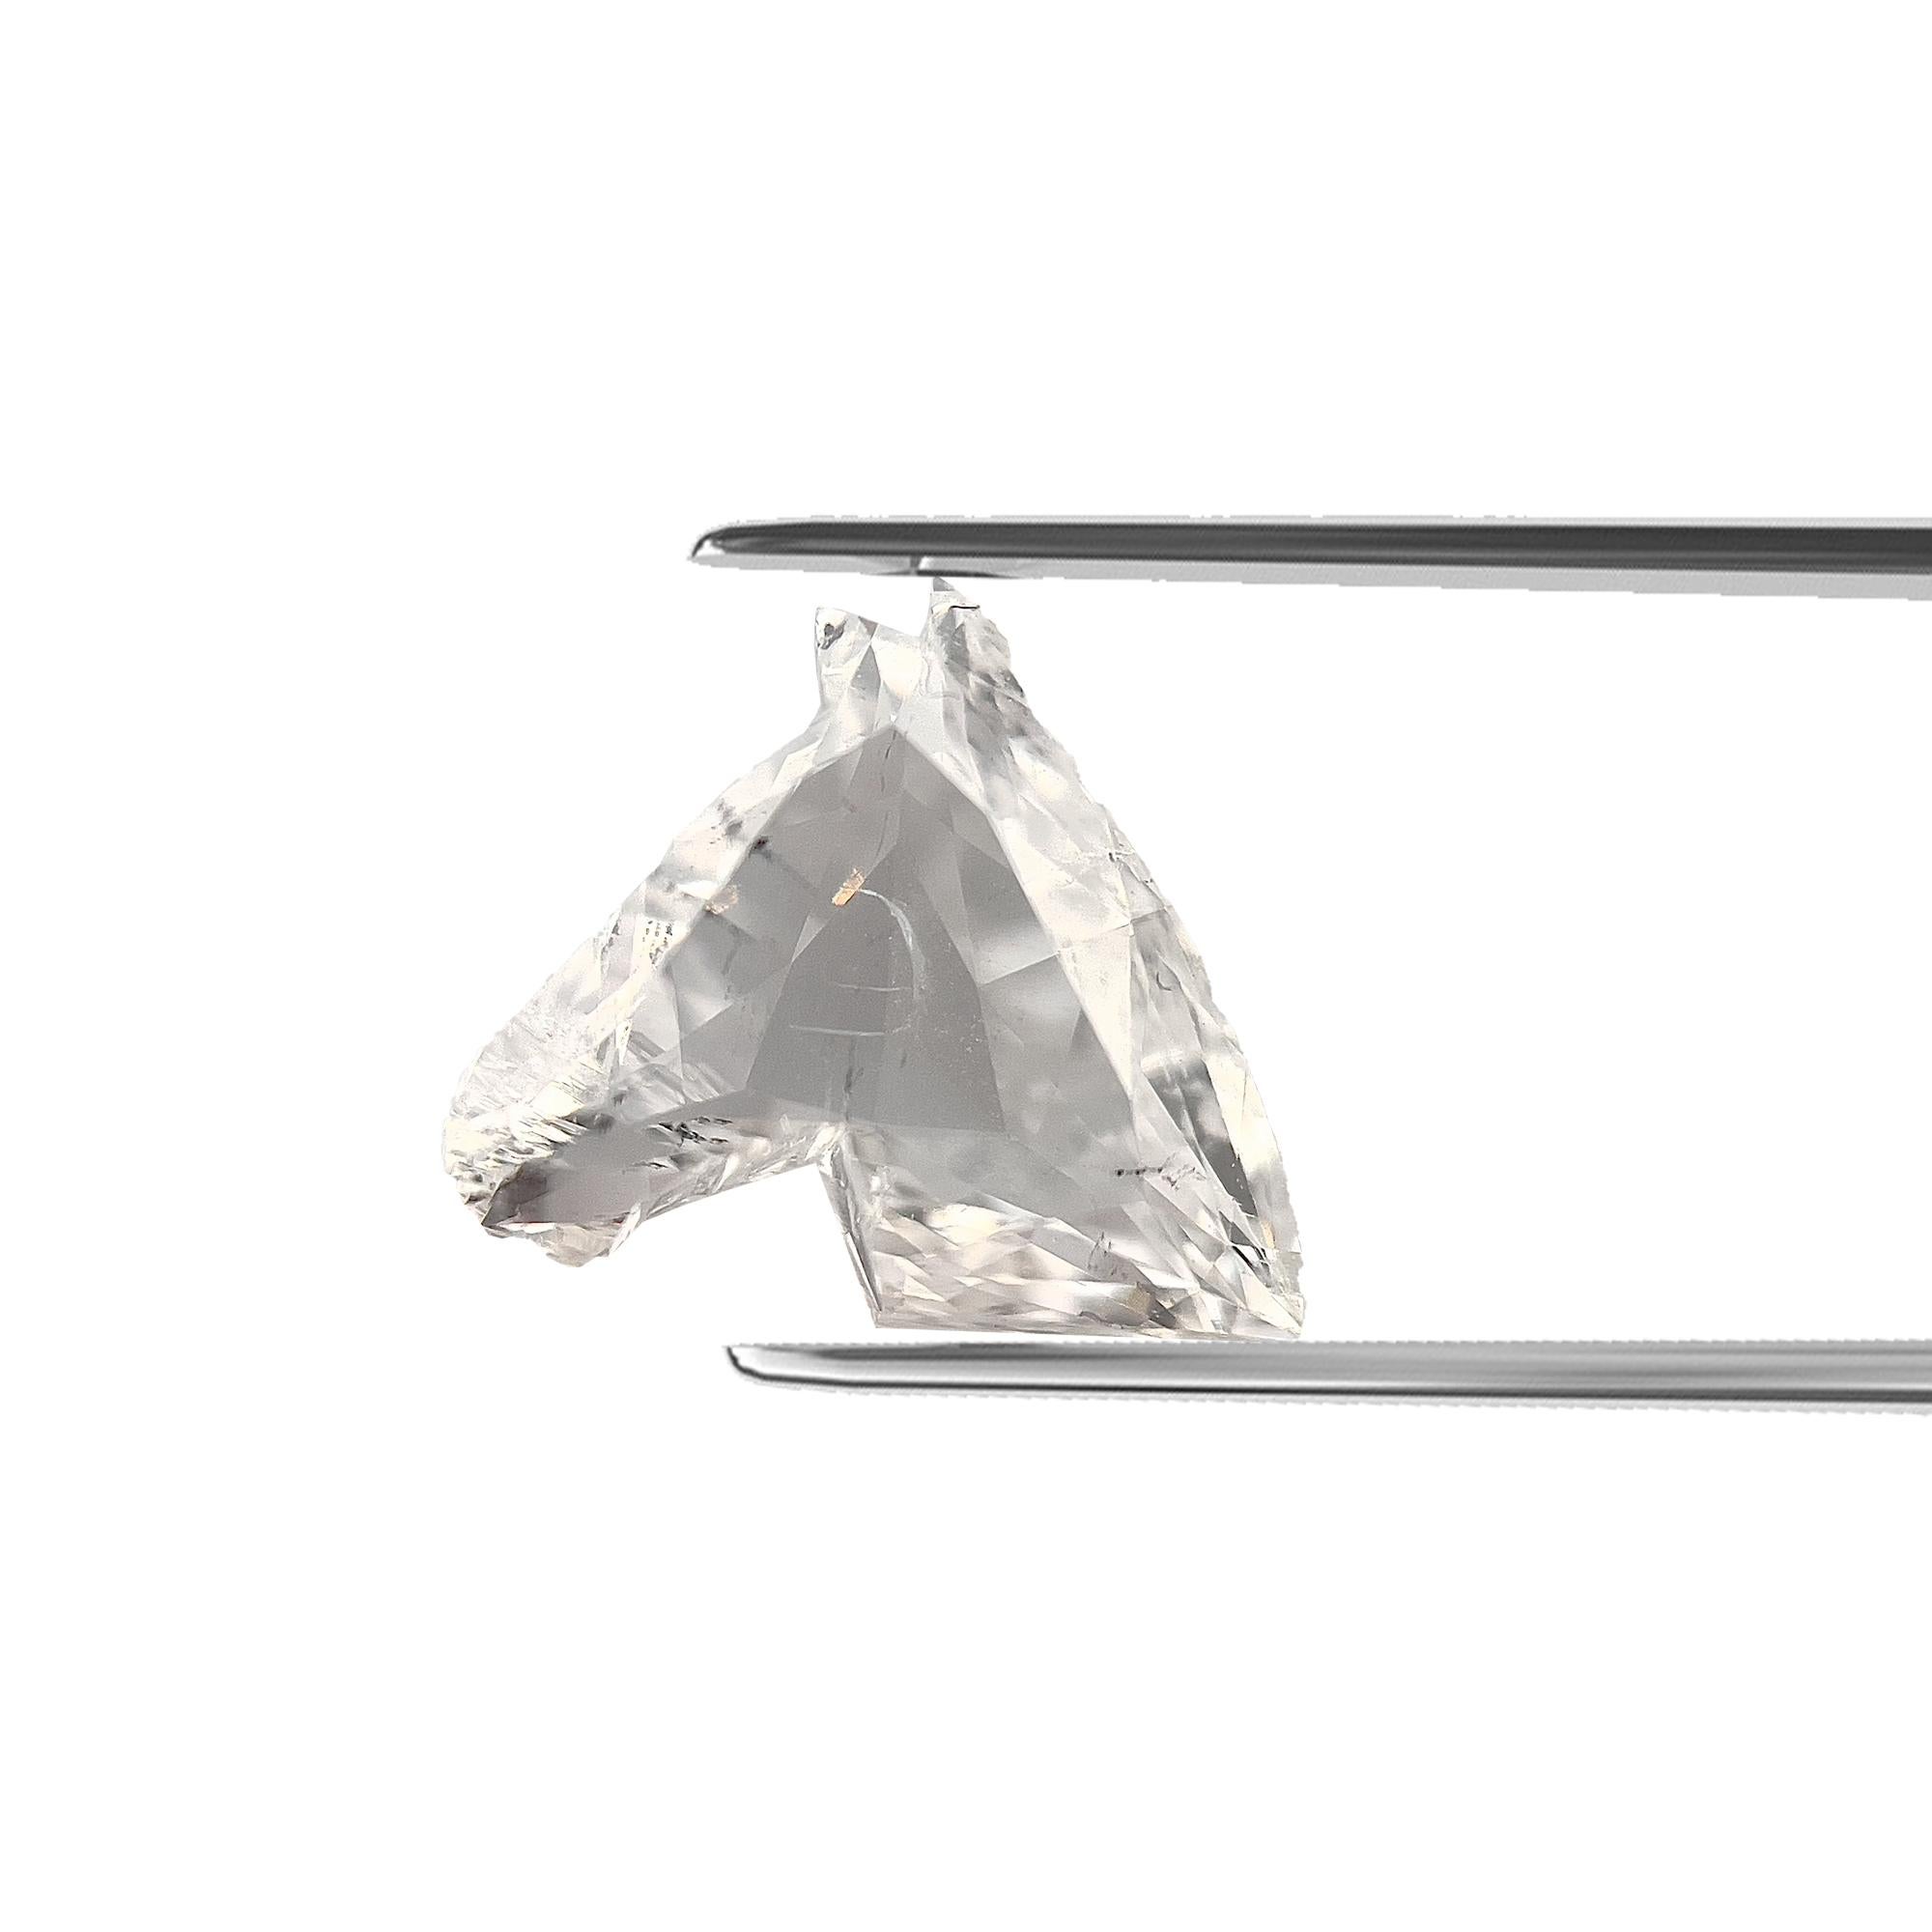 ITEM DESCRIPTION

ID #: 55303
Stone Shape: Horse Head 
Diamond Weight: 1.06CT
Clarity: SI2
Color: G
Measurements: 6.94x7.36x2.70mm
Our Price: $4,685
Appraisal Price: $7,800


These genuine diamonds are graded approximate by our in house gemologist.